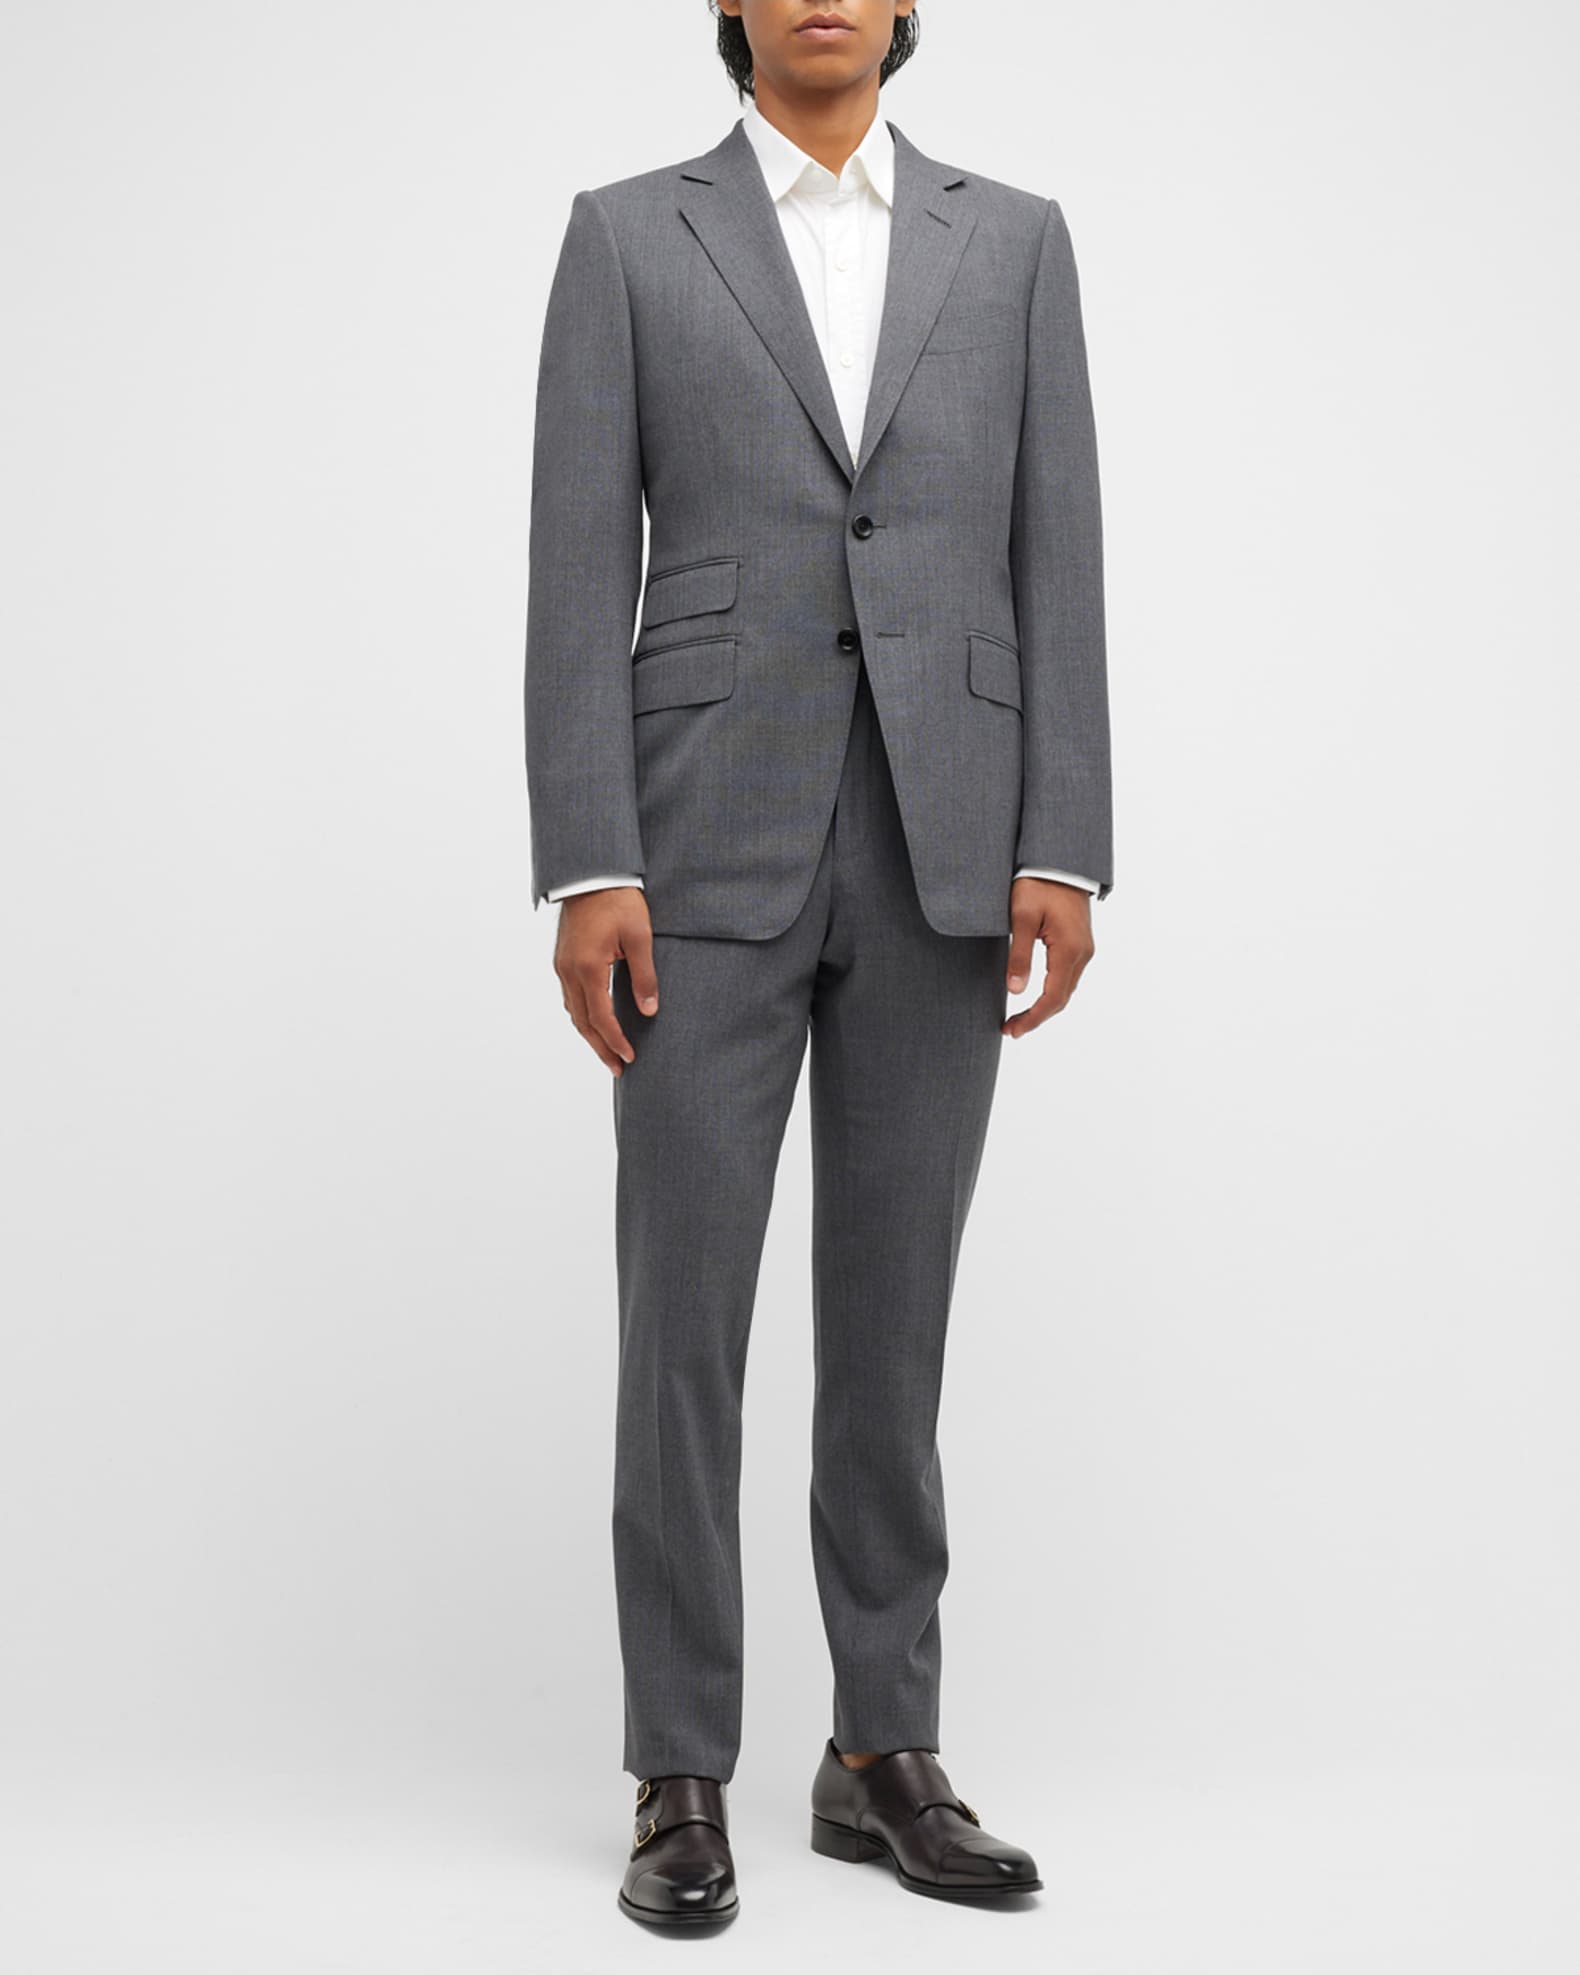 TOM FORD Men's O'Connor Solid Wool Suit | Neiman Marcus